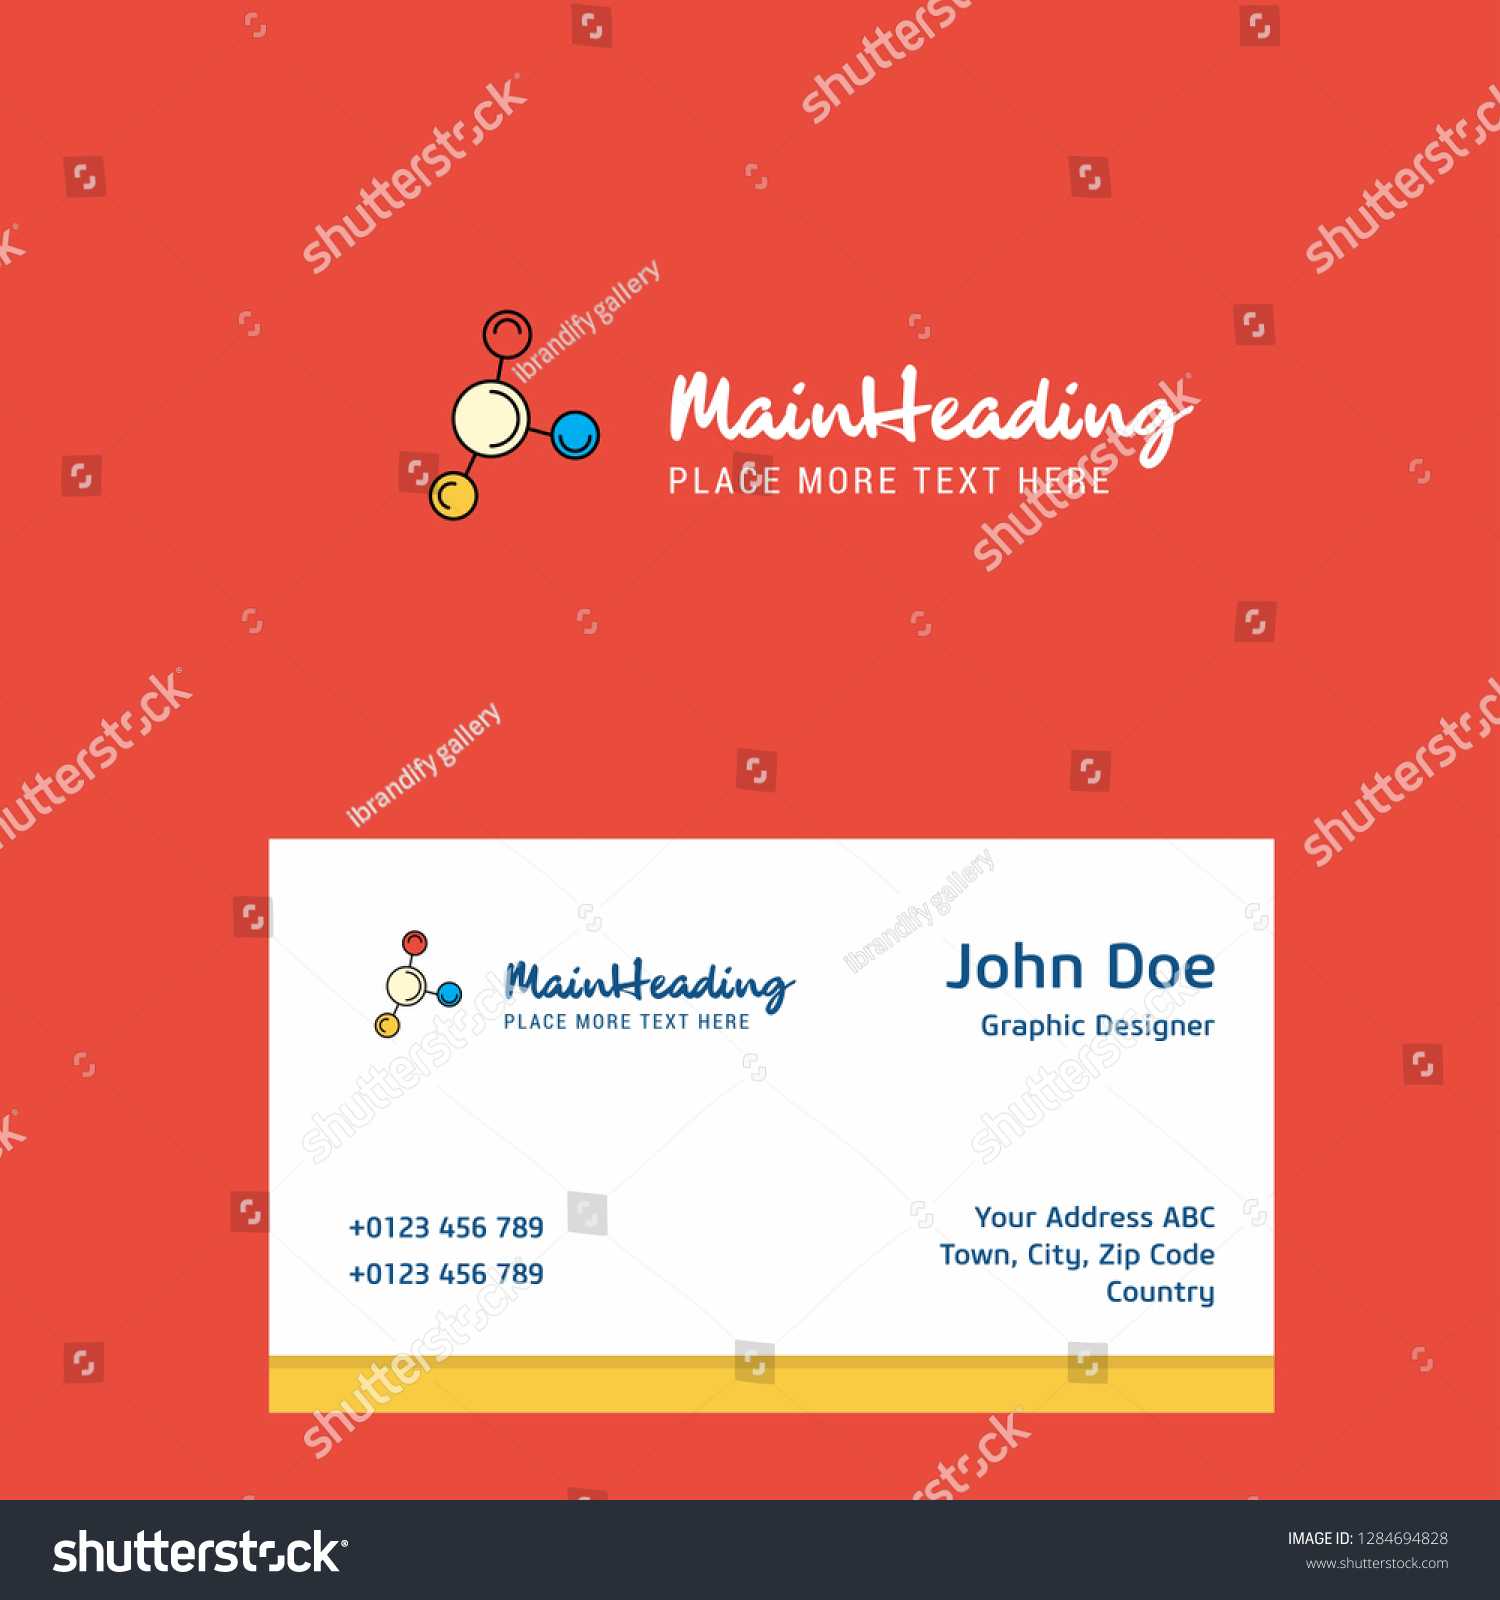 Networking Logo Design Business Card Template Stock Image Within Networking Card Template